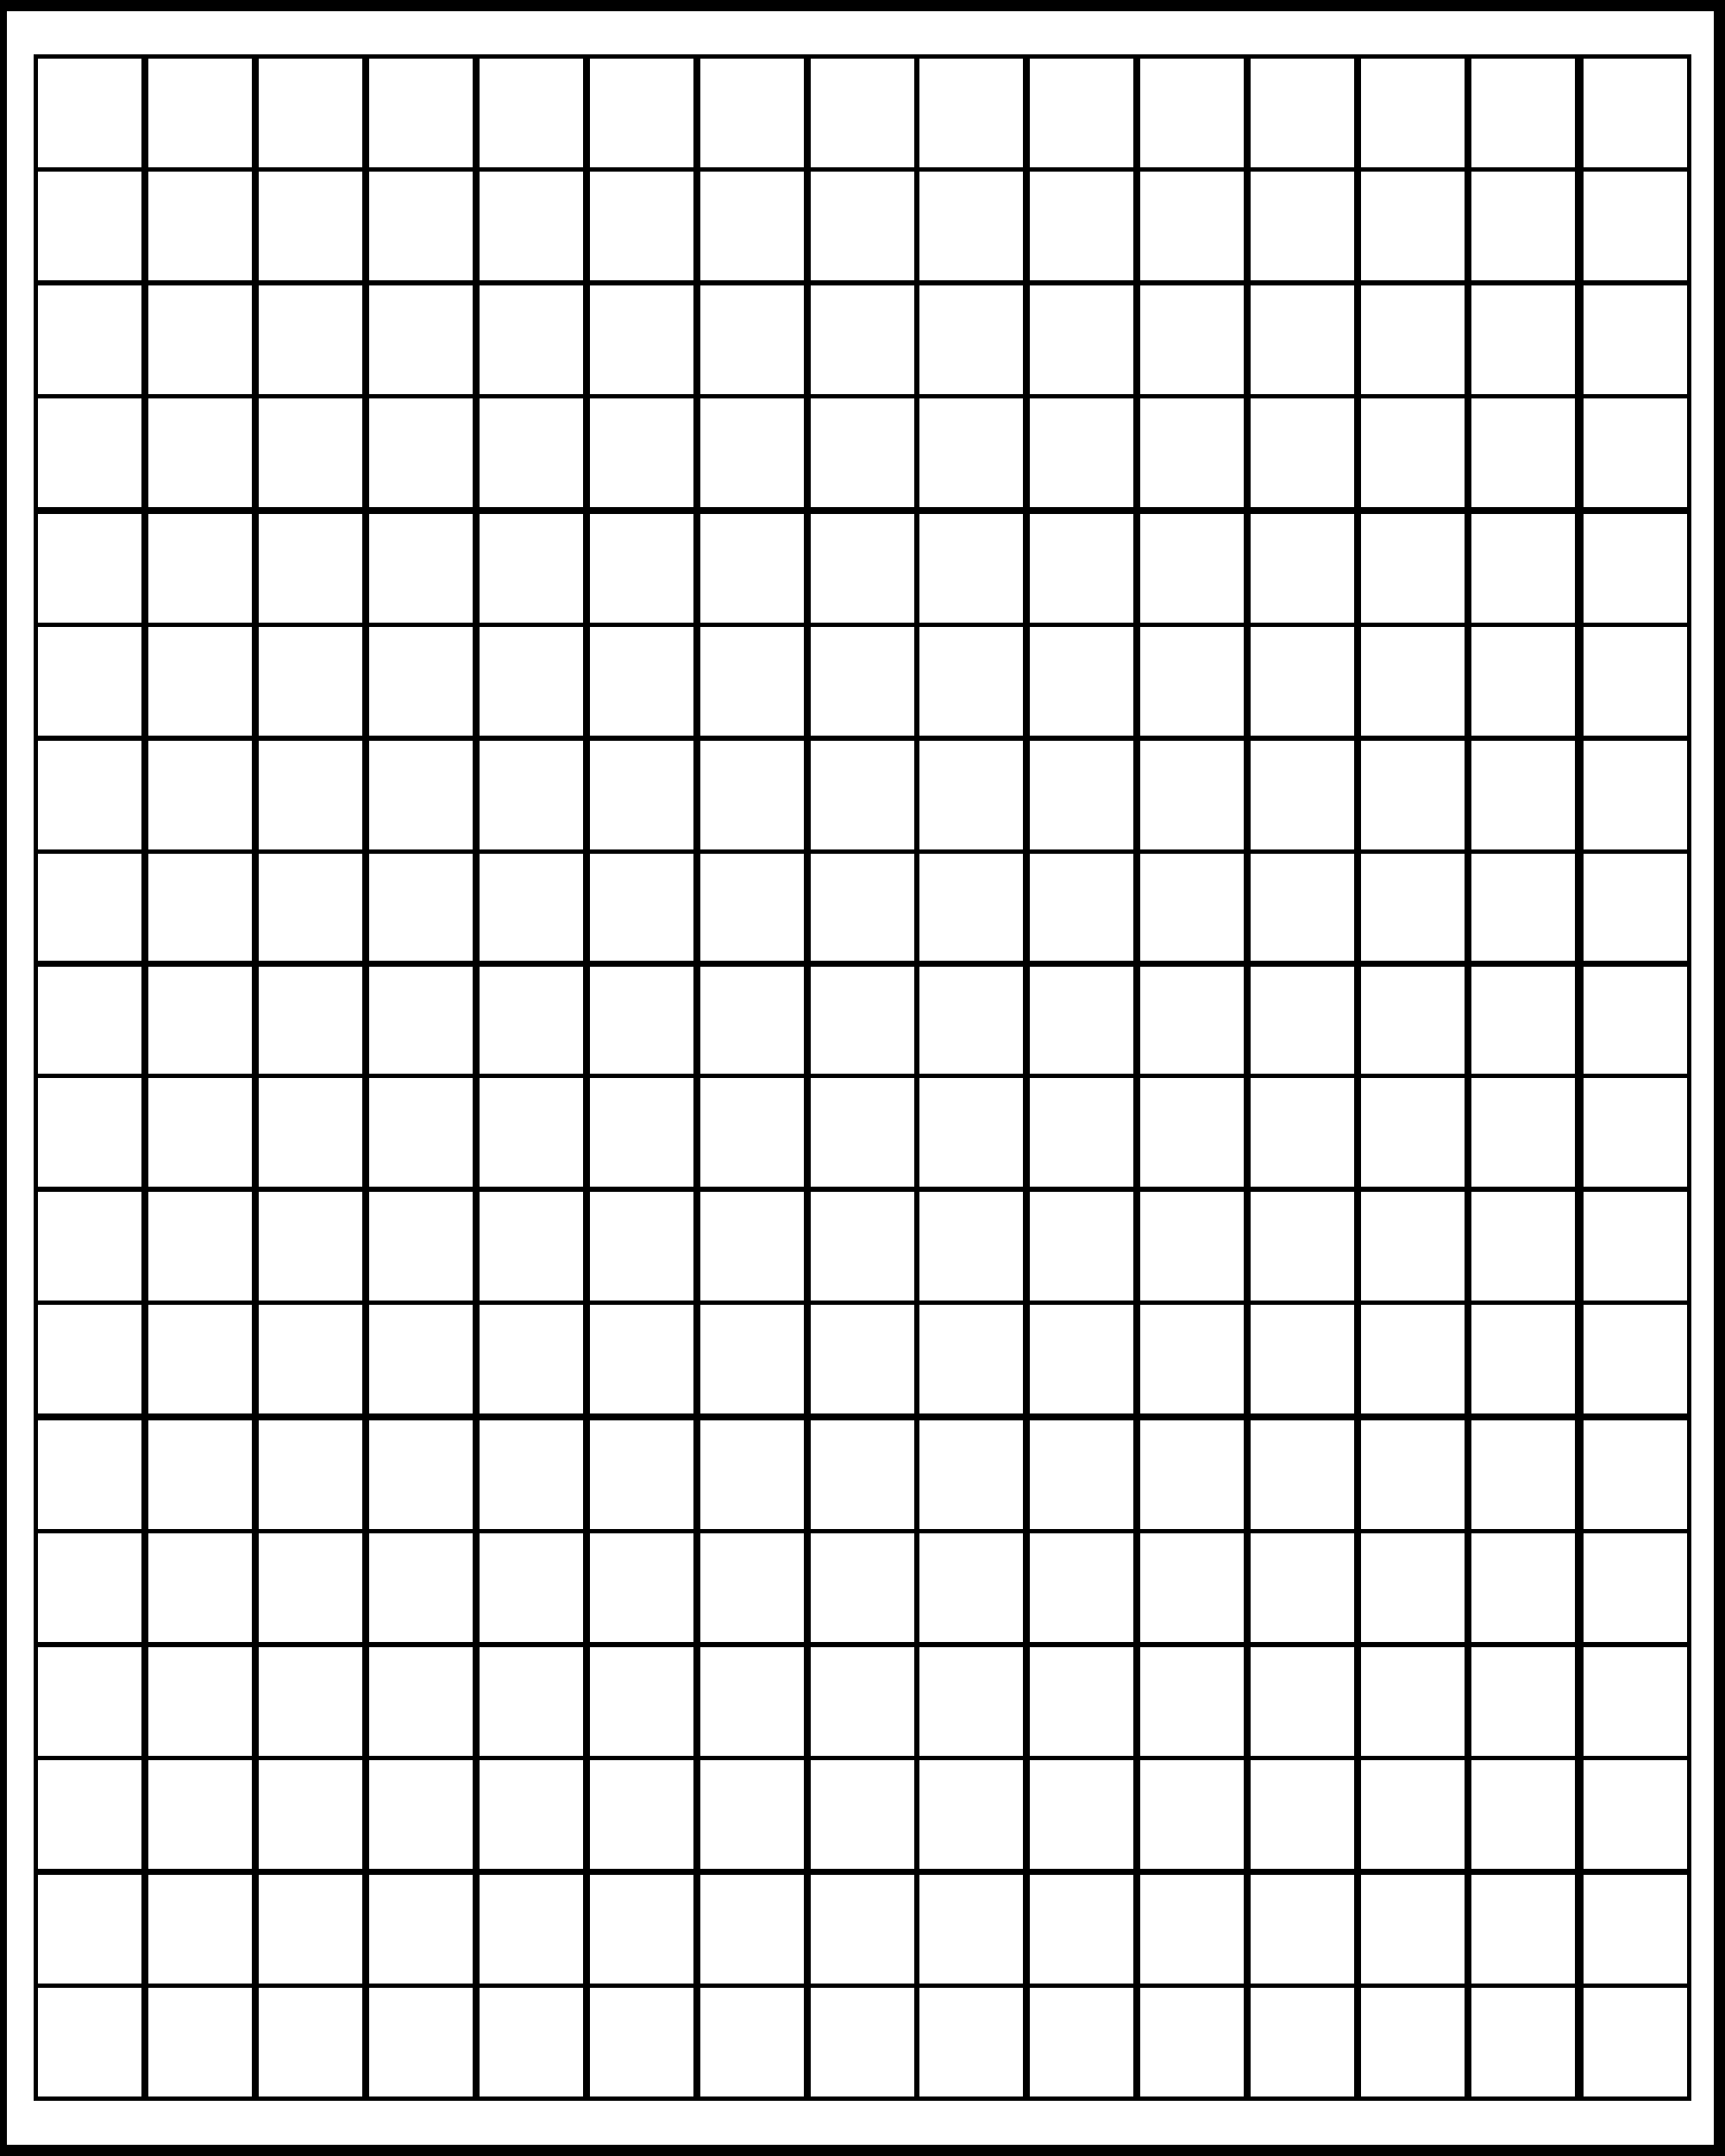 5 Printable Large Graph Paper Templates HowToWiki